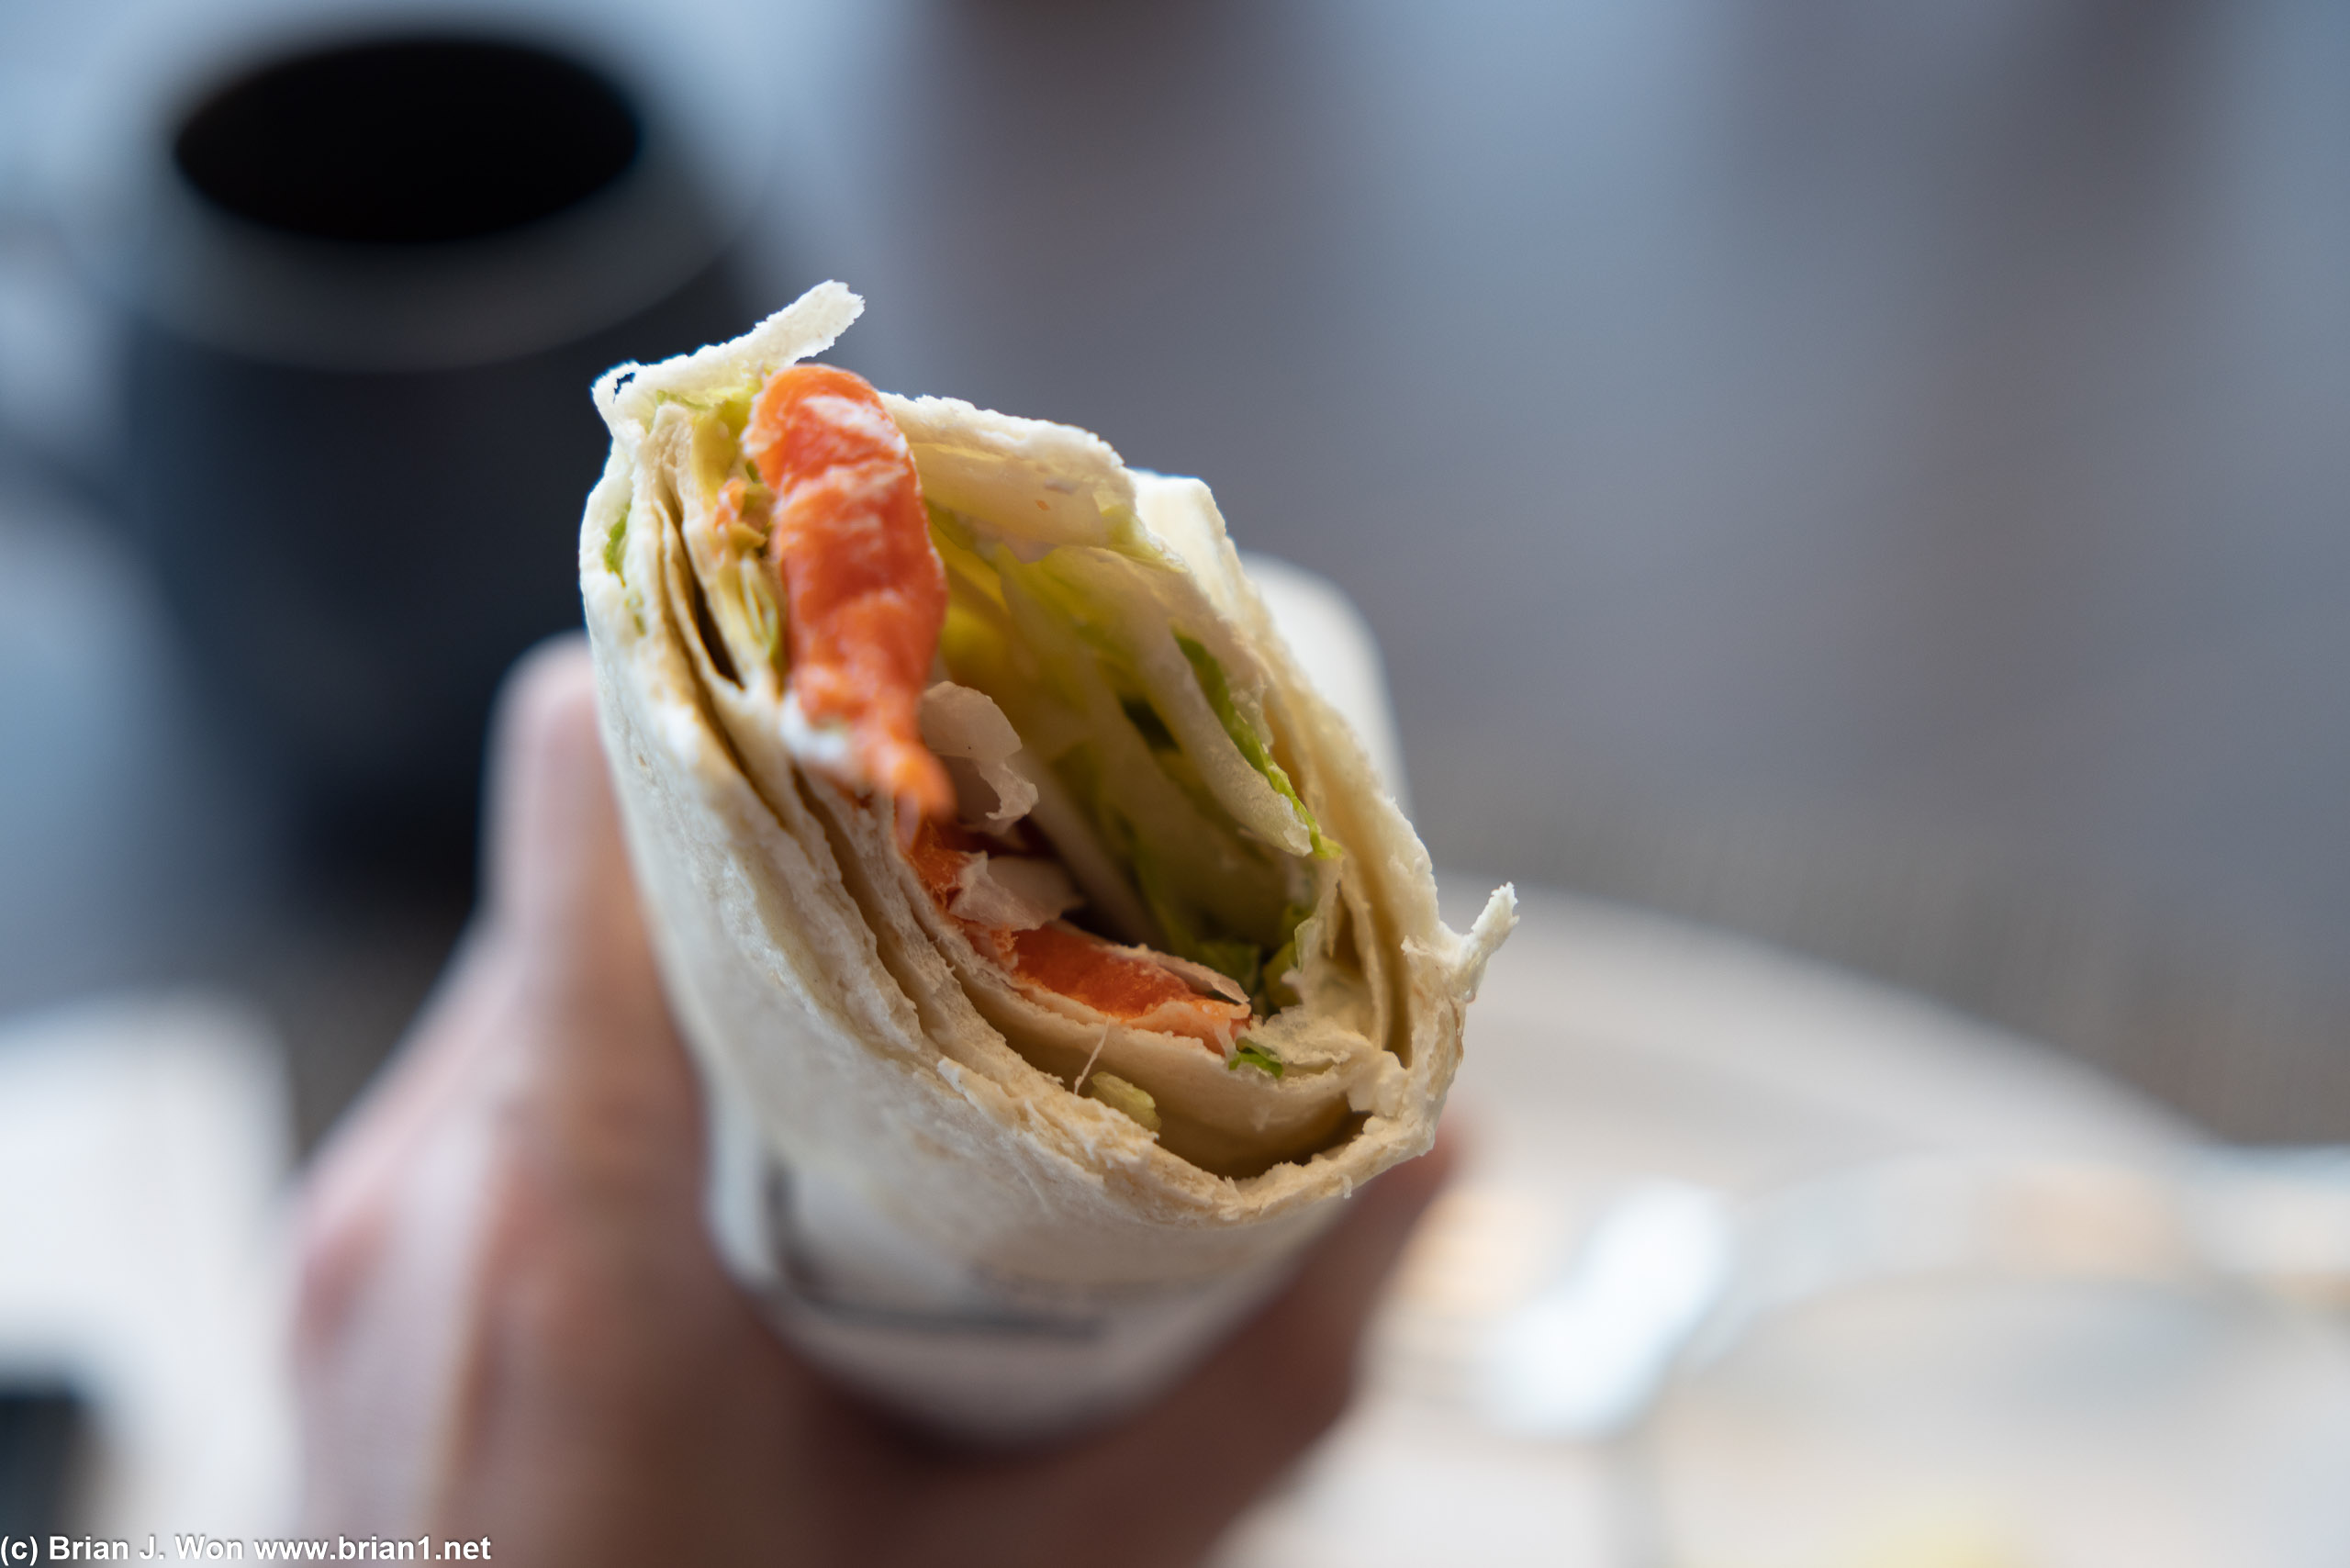 Smoked salmon breakfast wrap doesn't look like much, but a nice change from heavier food.